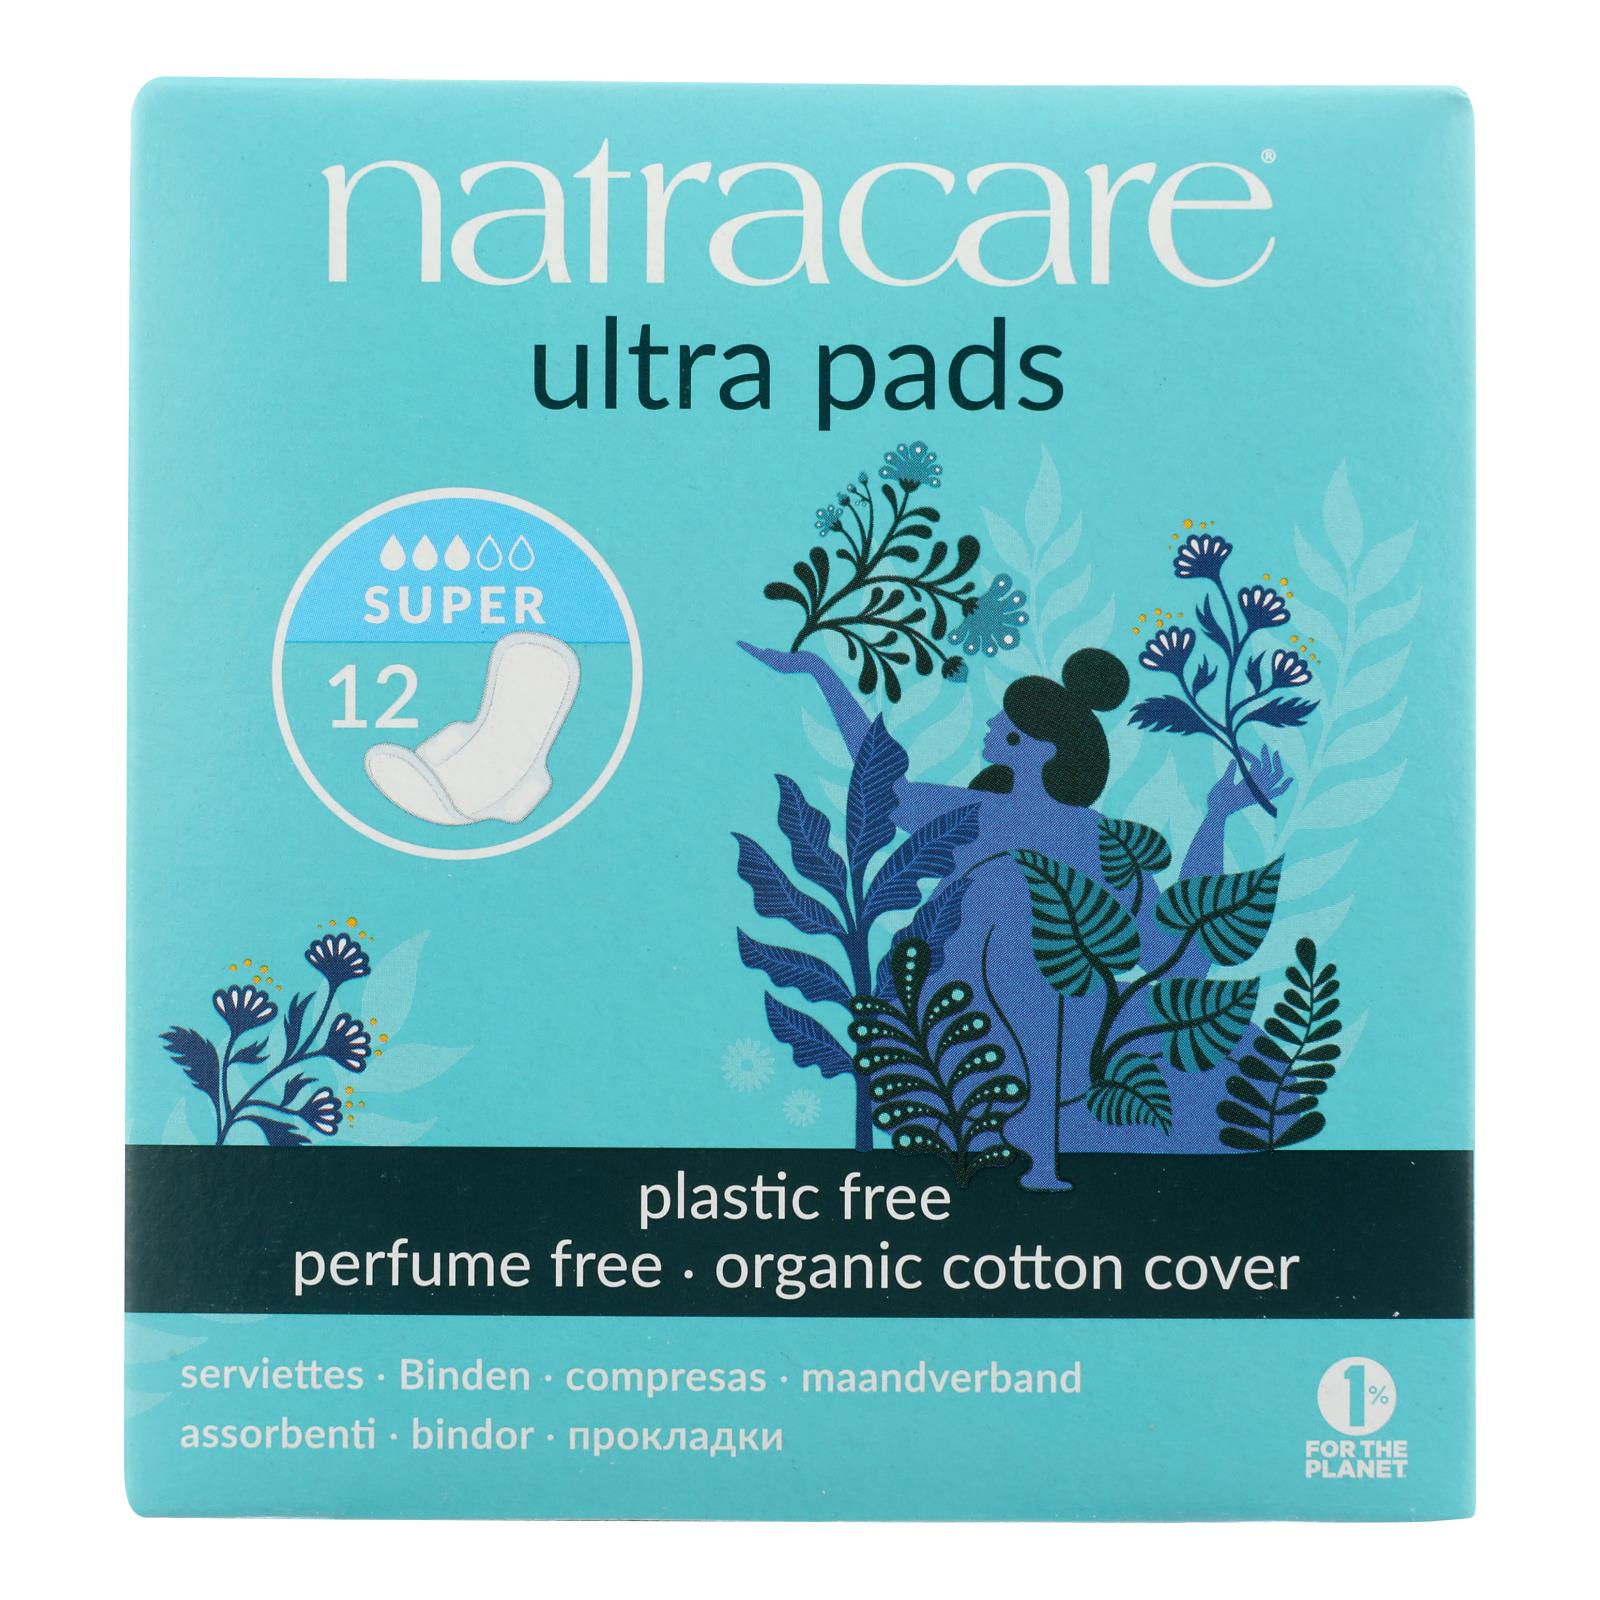 Natracare Organic & Natural Ultra Pads  - Case of 12 - 12 CT